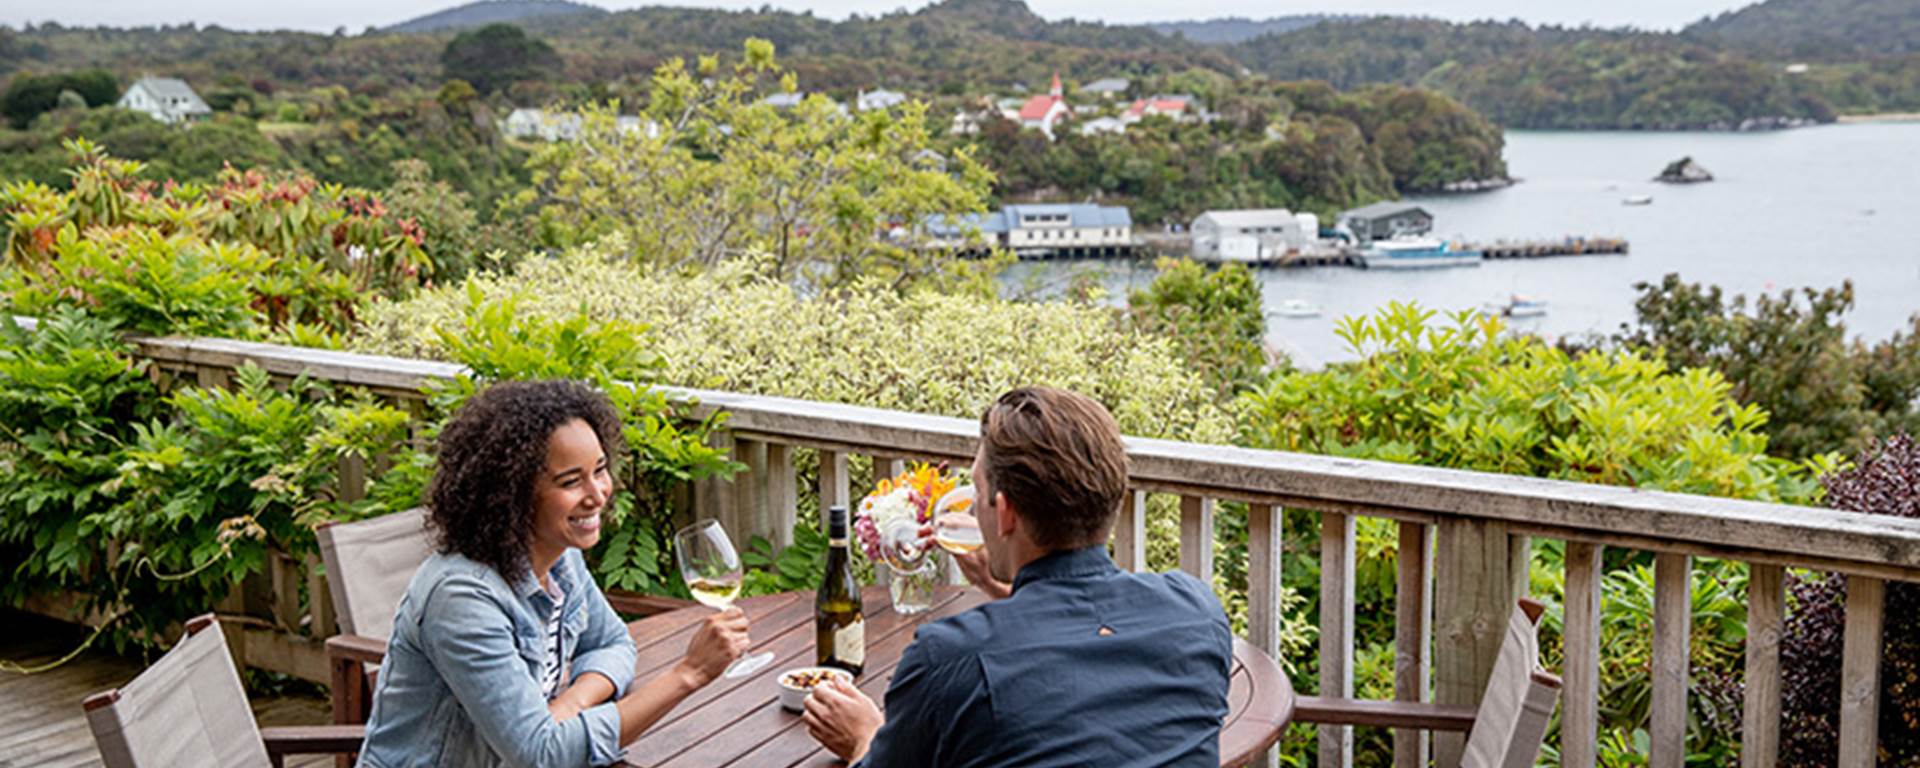 A couple enjoy a bottle of wine on the balcony of the Stewart Island Lodge